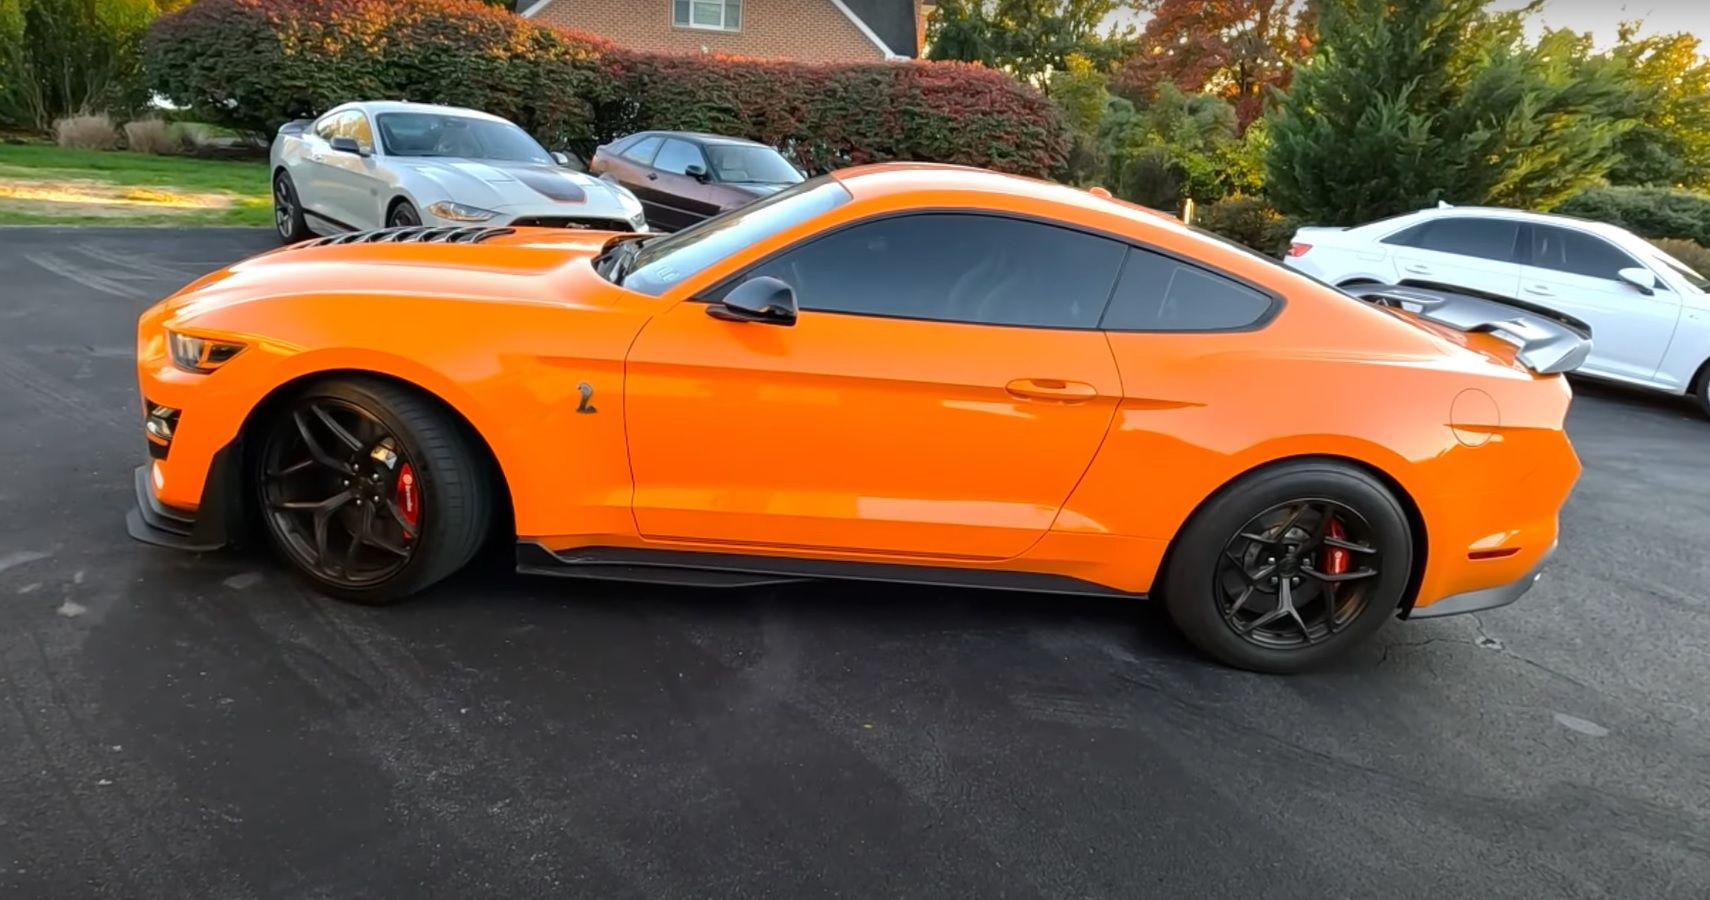 Street Speed 717 Orange Shelby Ford Mustang GT500 with 1,000 HP